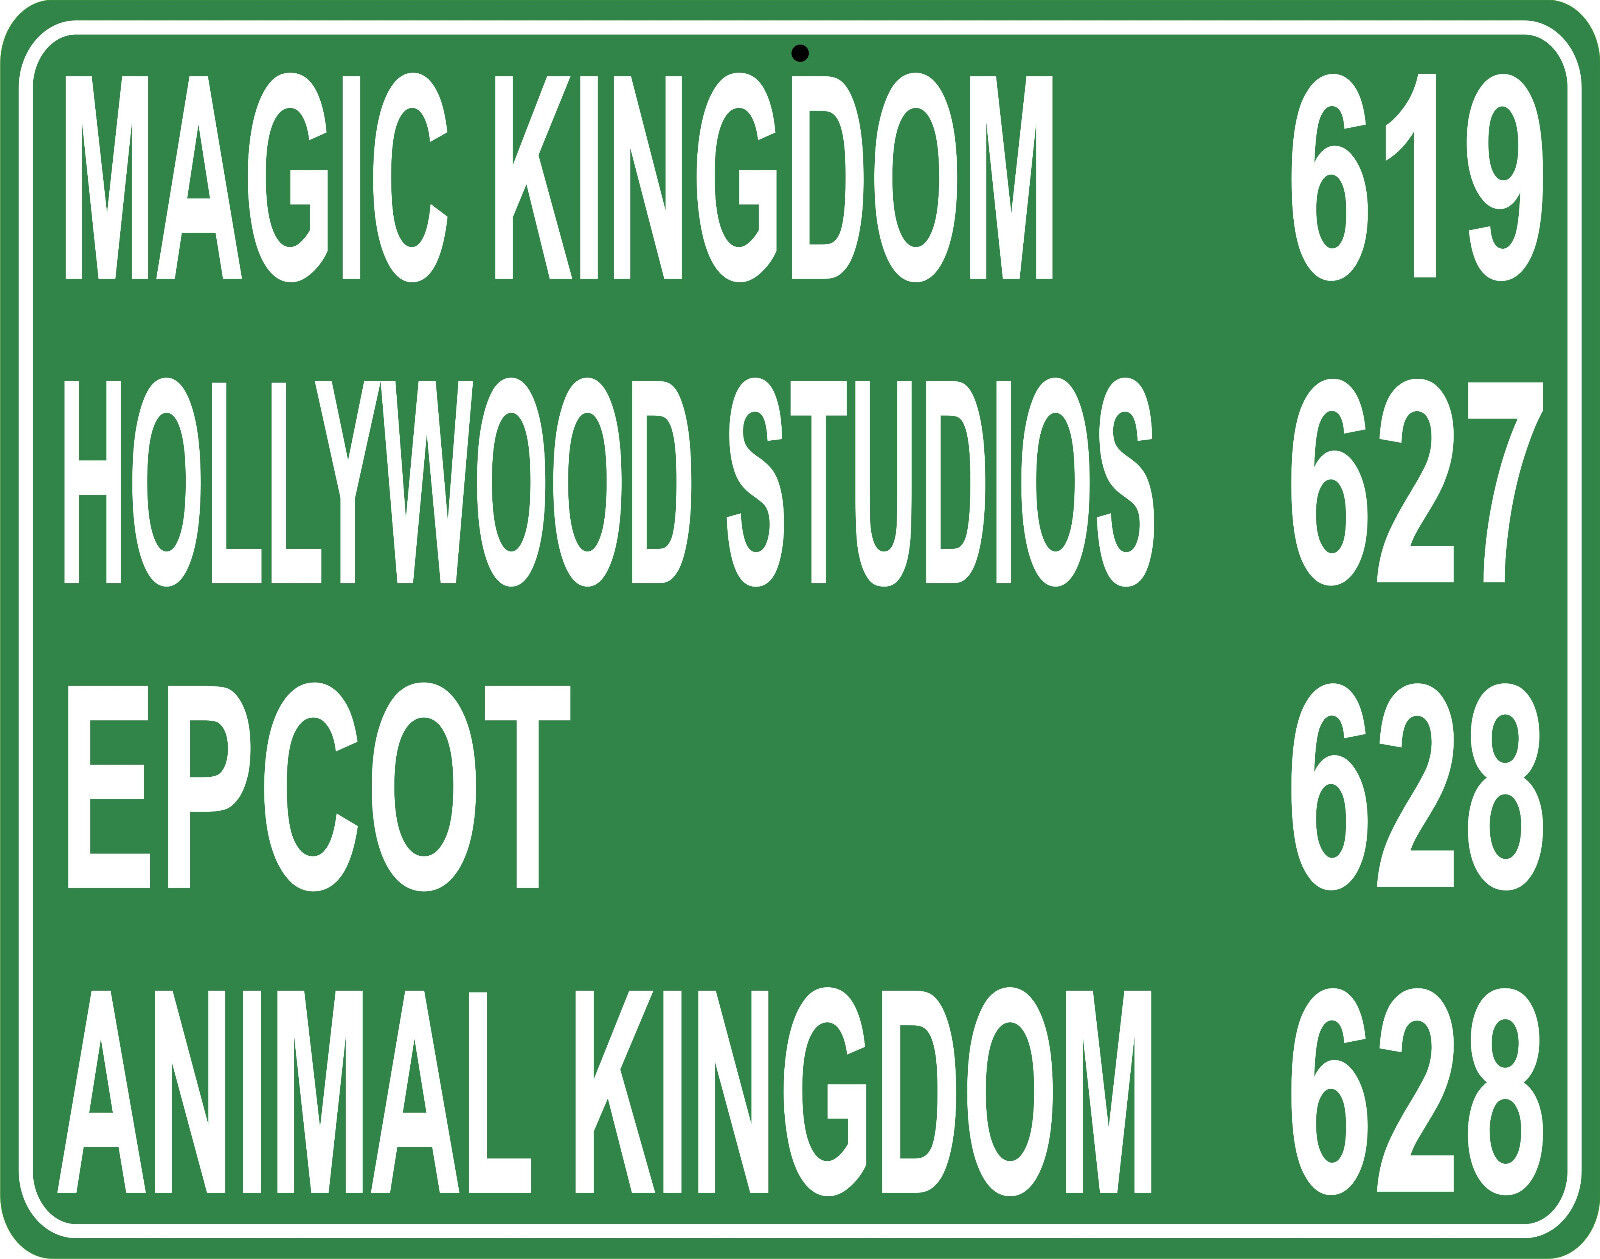 Walt Disney World distance 11x14 Metal Hwy sign - custom miles from your house